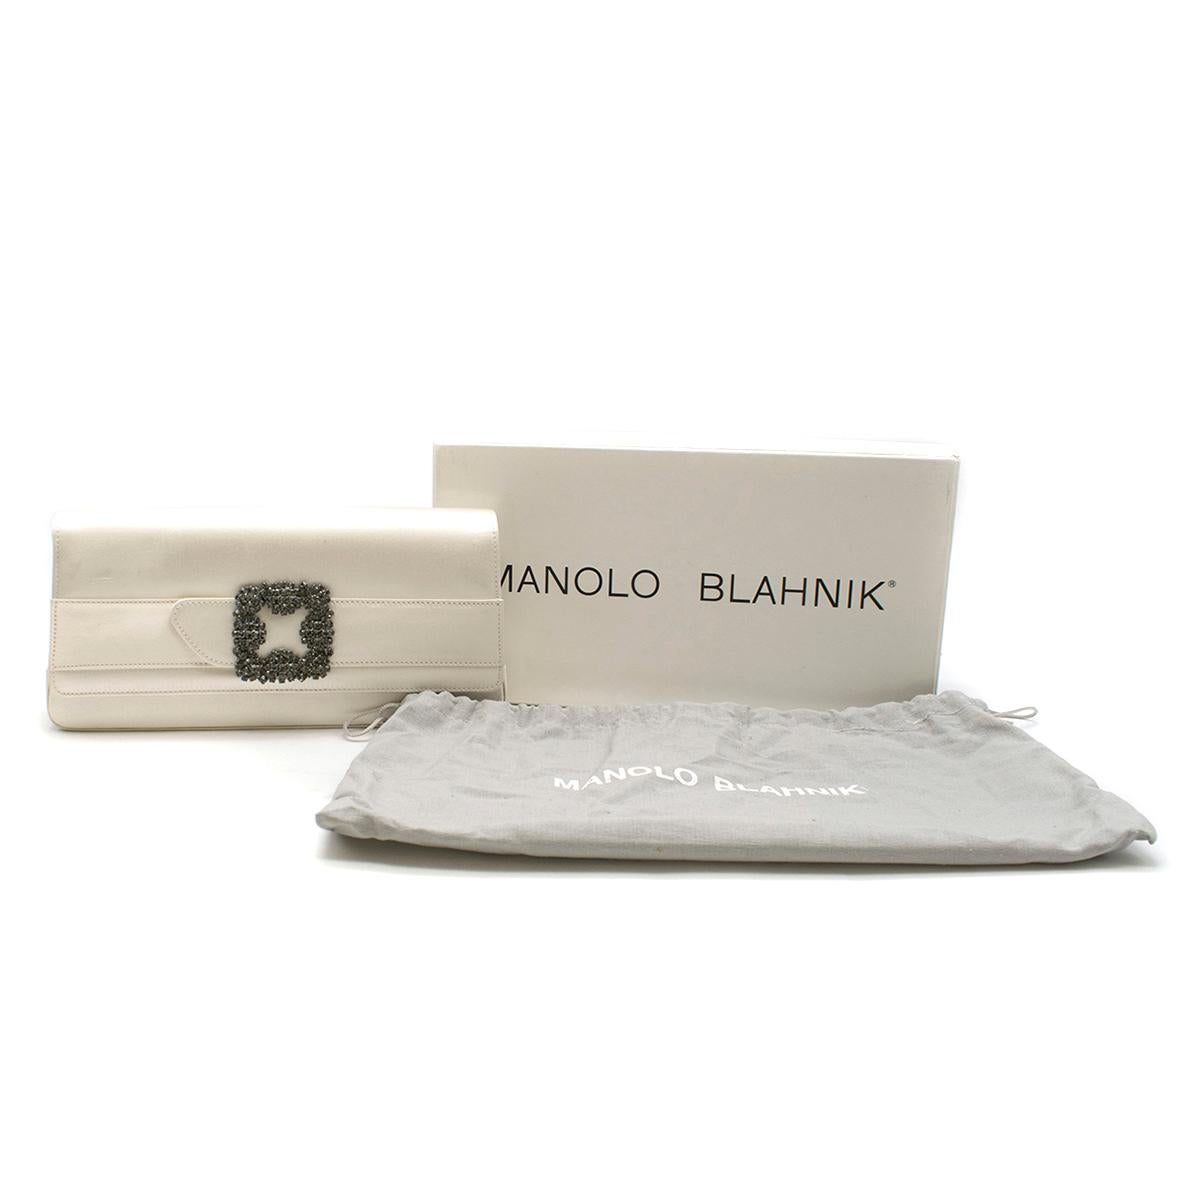 Manolo Blahnik Off-white Satin Jewel Buckle Clutch

- Off-white clutch bag 
- Rectangular 
- Satin 
- Flap-over design with Swarovski crystal buckle 
- Internal compartment, mirror and removable chains with two length options. 
- Magnetic closure 
-